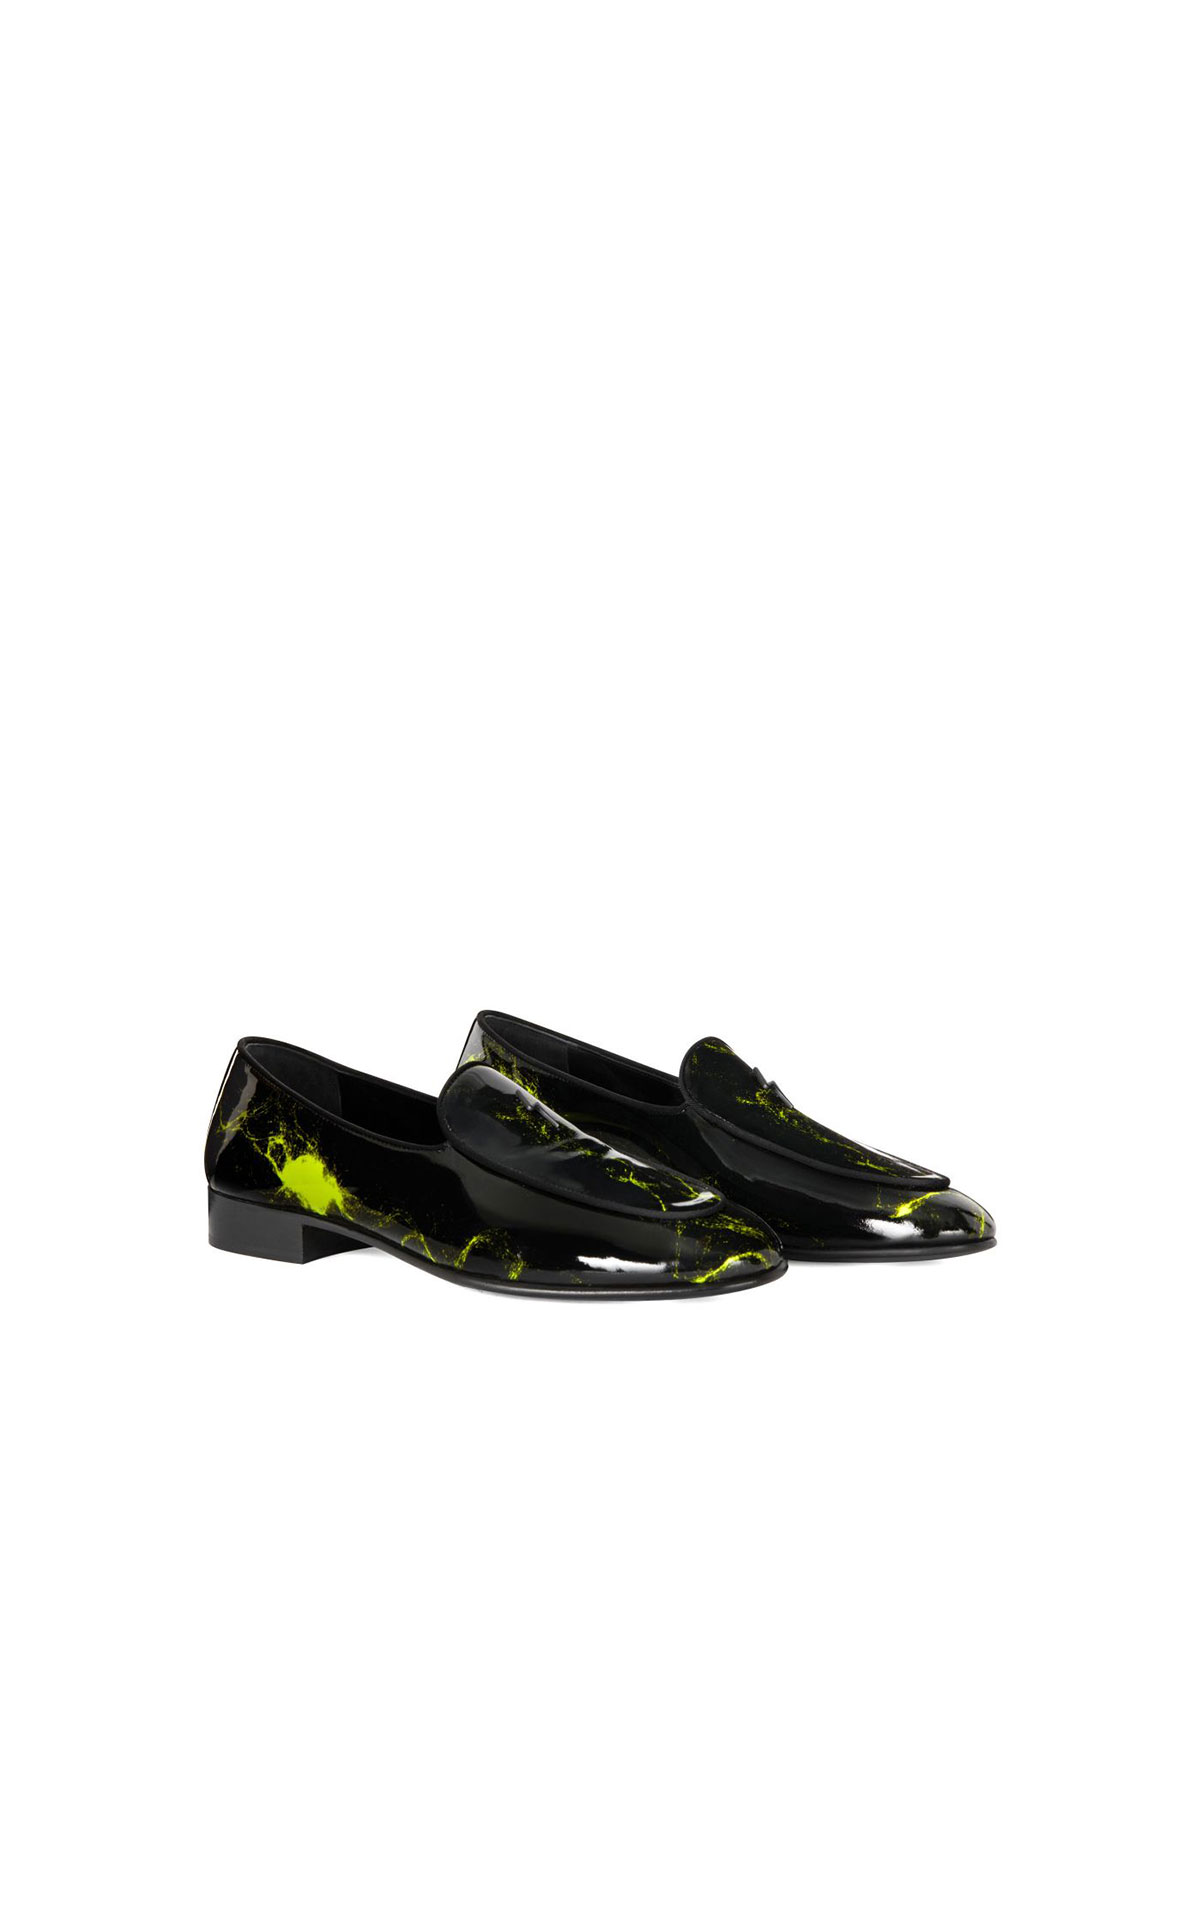 Giuseppe Zannotti Rudolph neon loafer from Bicester Village